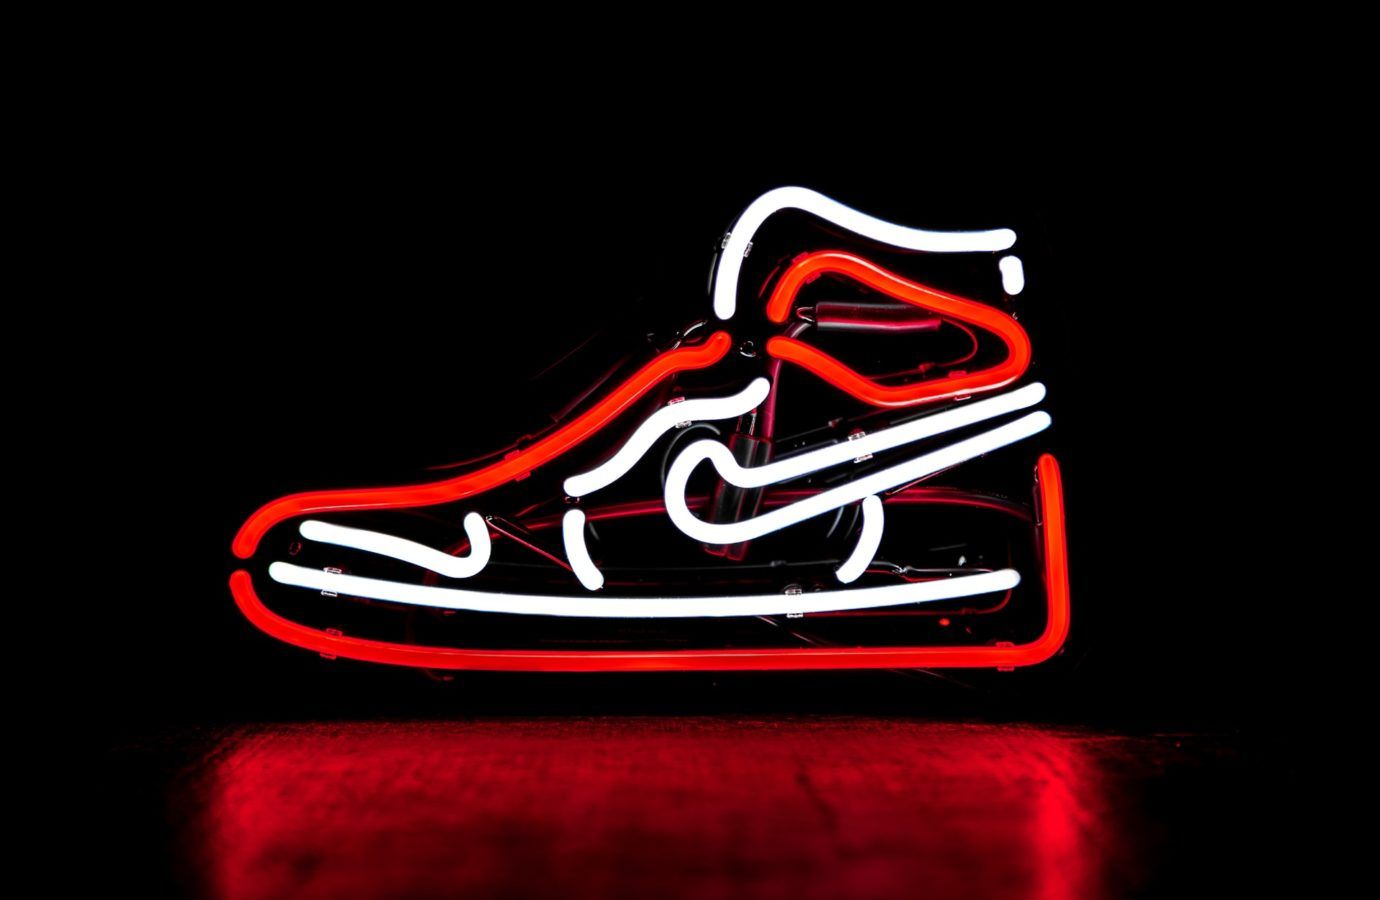 Virtual Nike sneakers and NFTs may soon be a reality